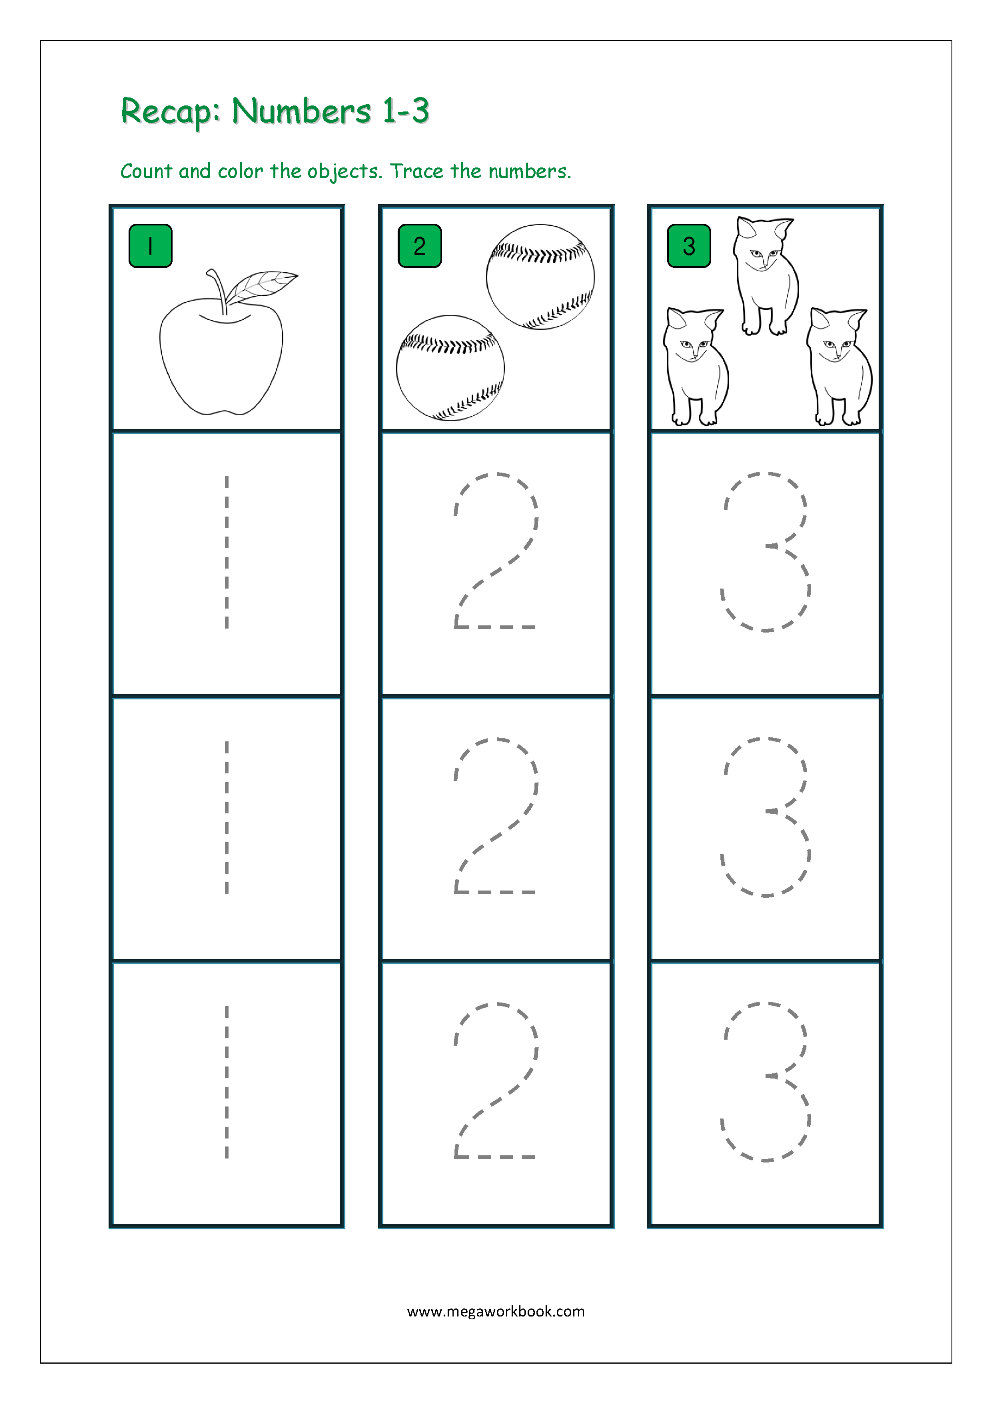 number-tracing-tracing-numbers-number-tracing-worksheets-tracing-numbers-1-to-10-writing